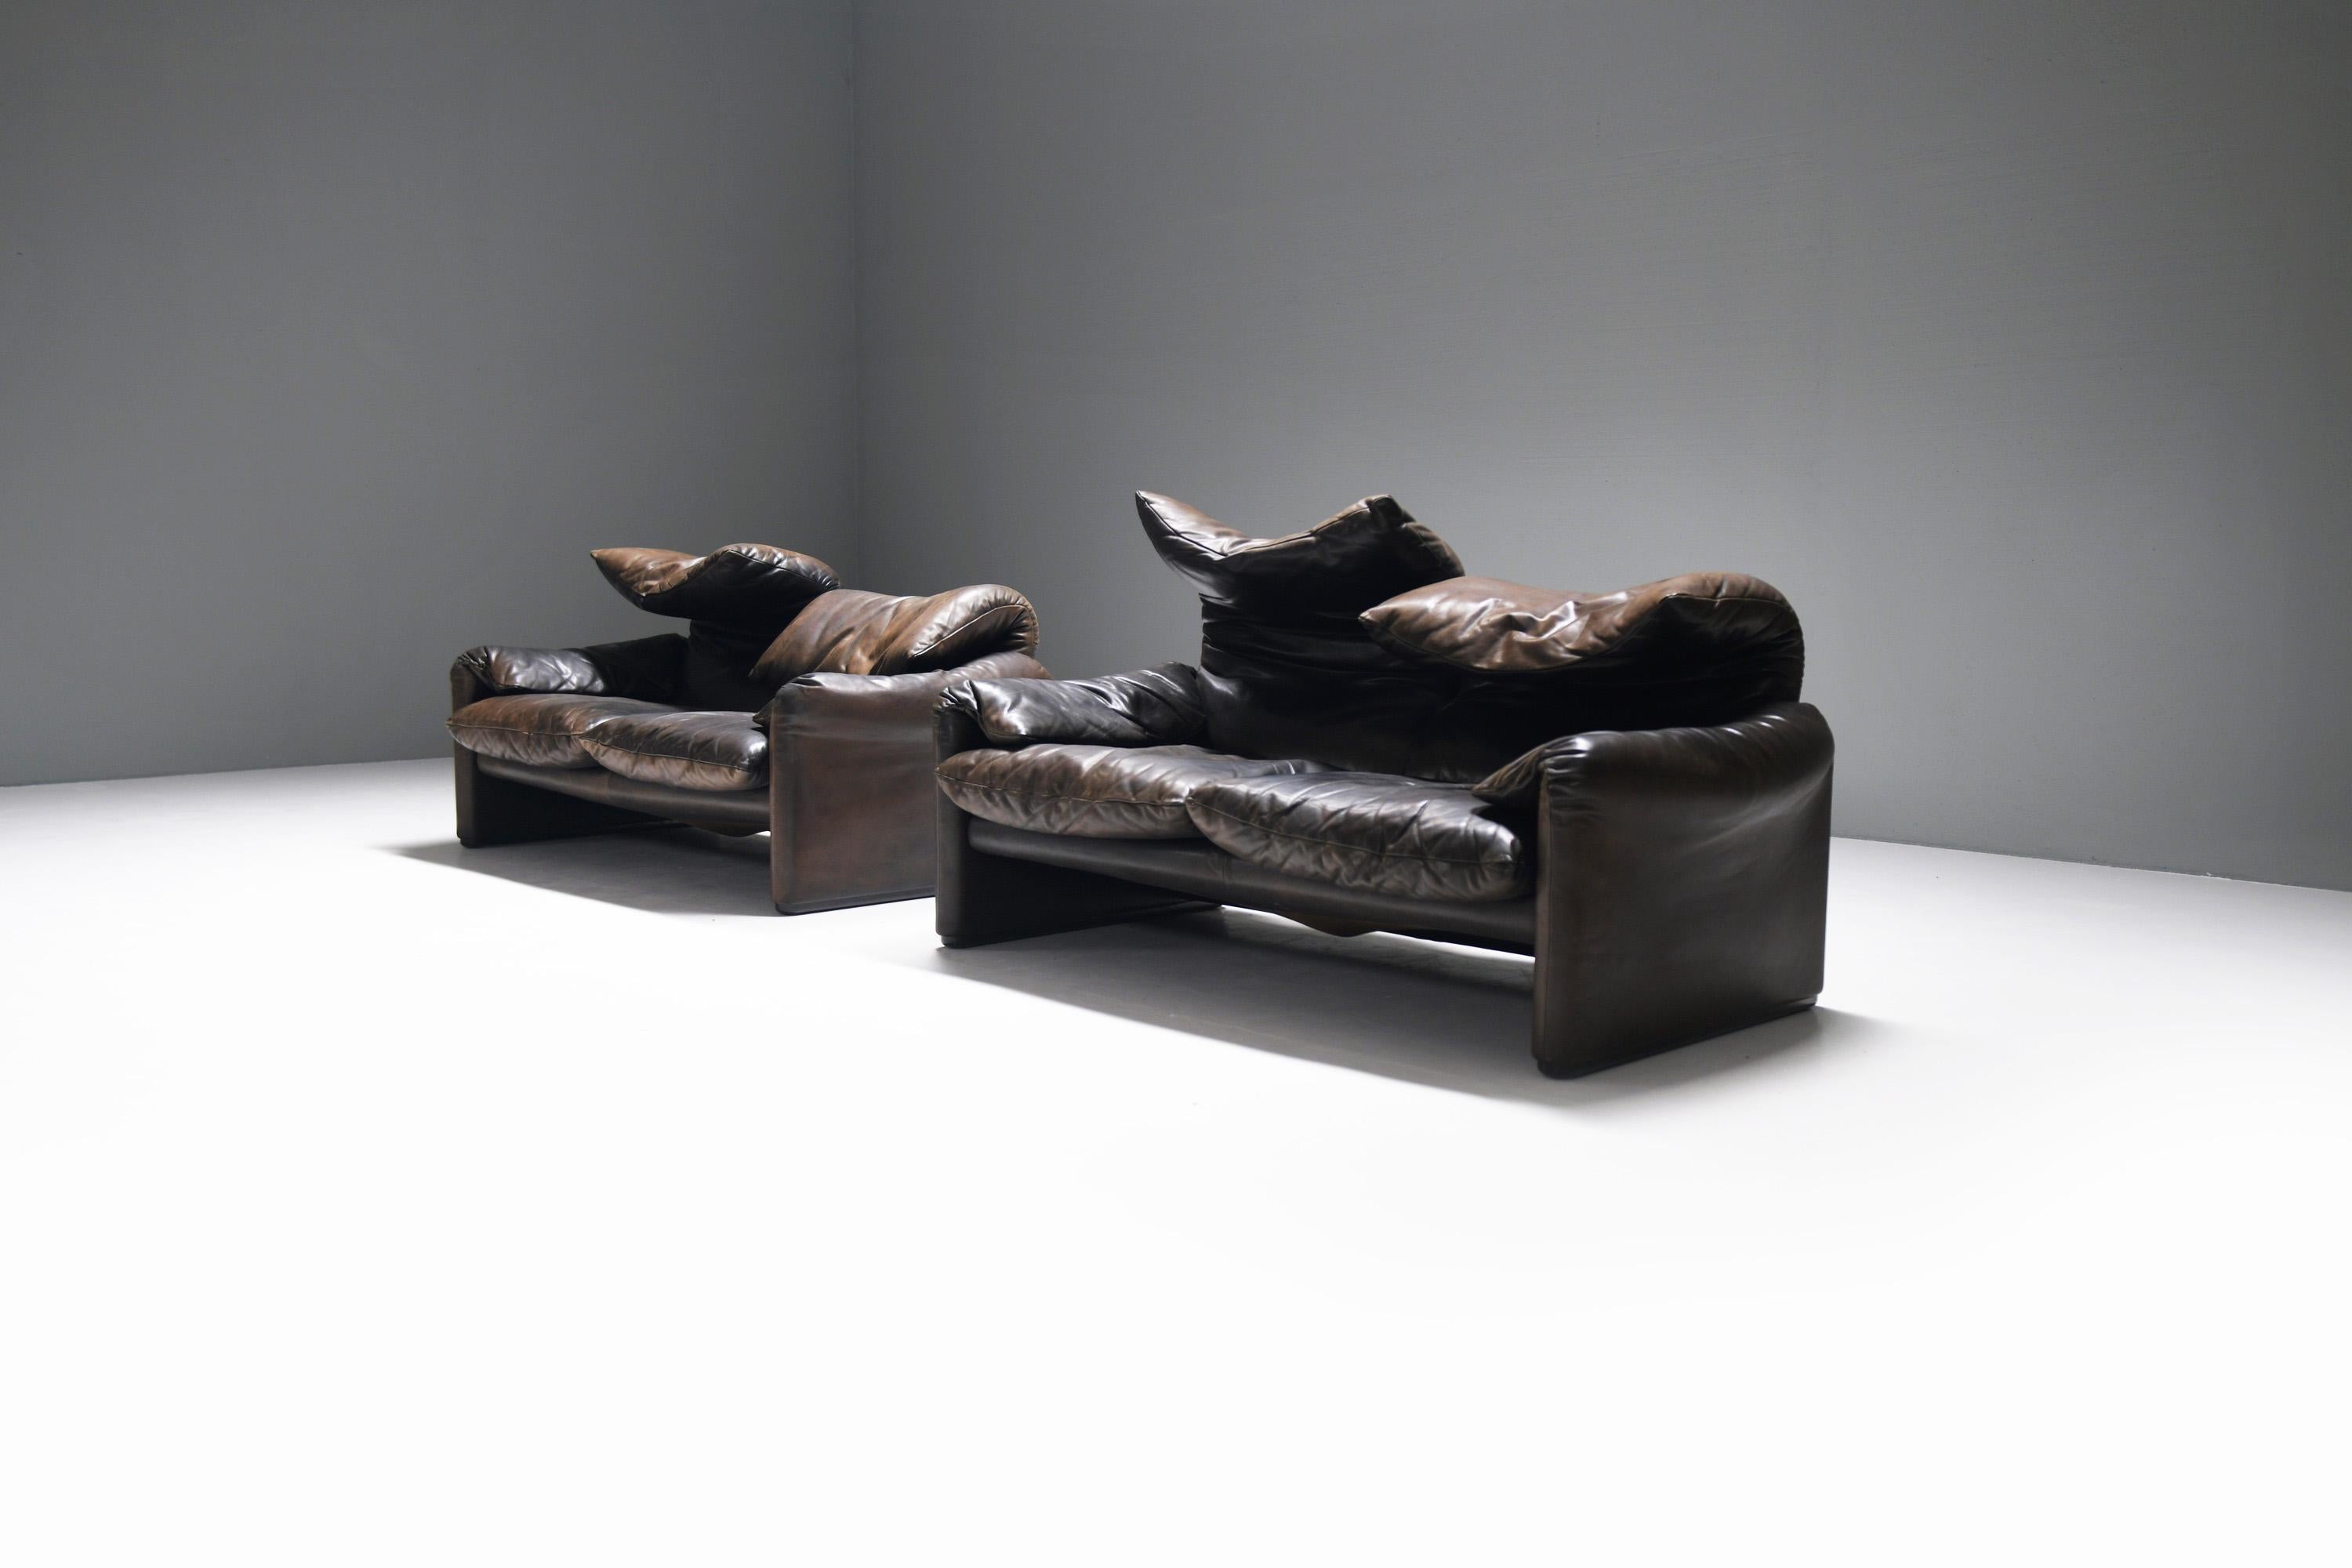 Nice matching set of rich patinated Maralunga sofa’s in their original leather.  
Designed by Vico Magistretti for CASSINA Italy in 1974.

An international best-seller with warm, inviting shapes, where the back extends upwards to form a head-rest.